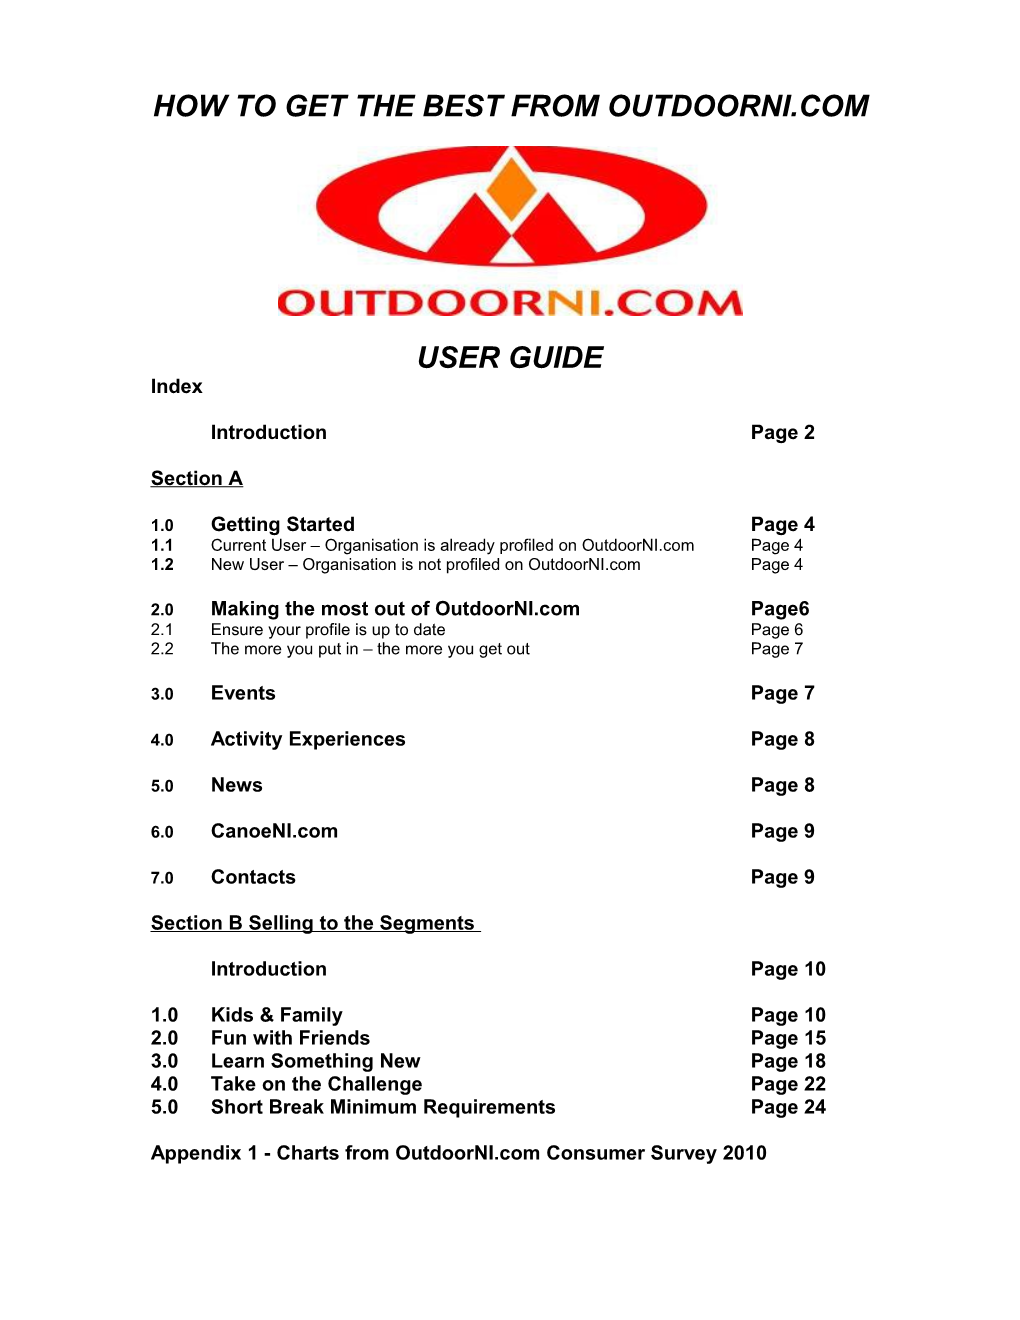 How to Get the Best from Outdoorni